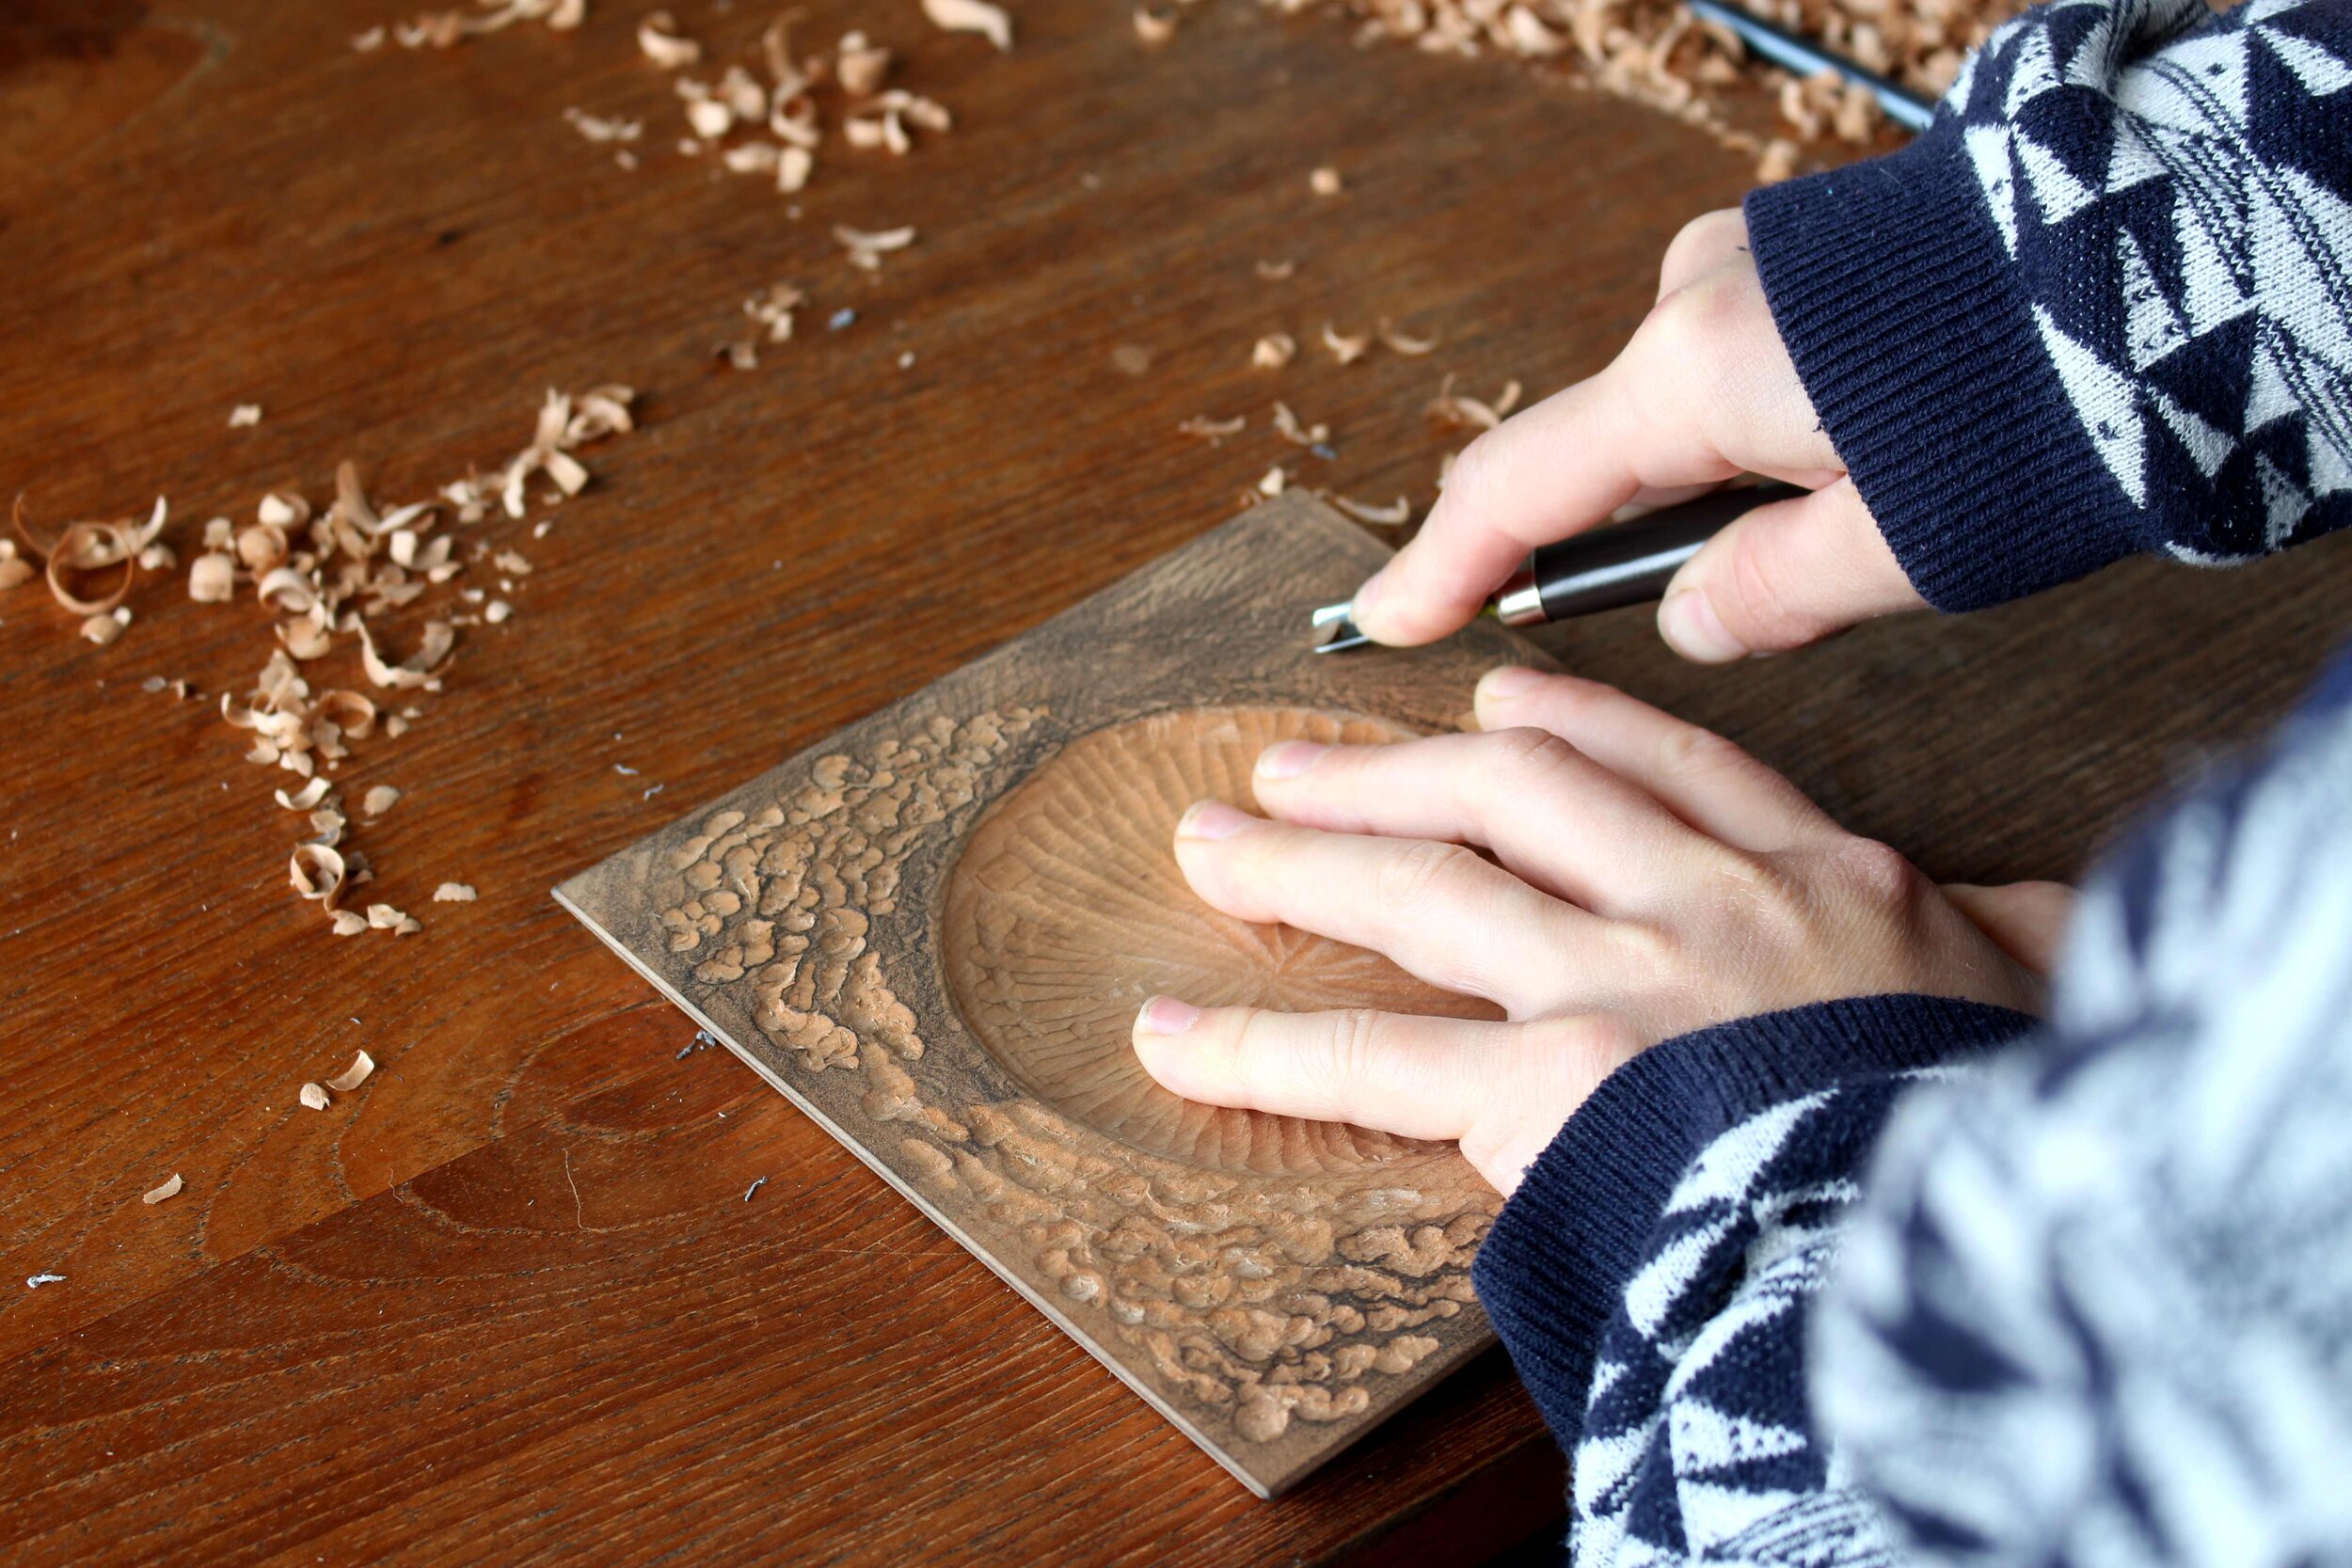 Graphite on the surface of the wood makes carving easier to see